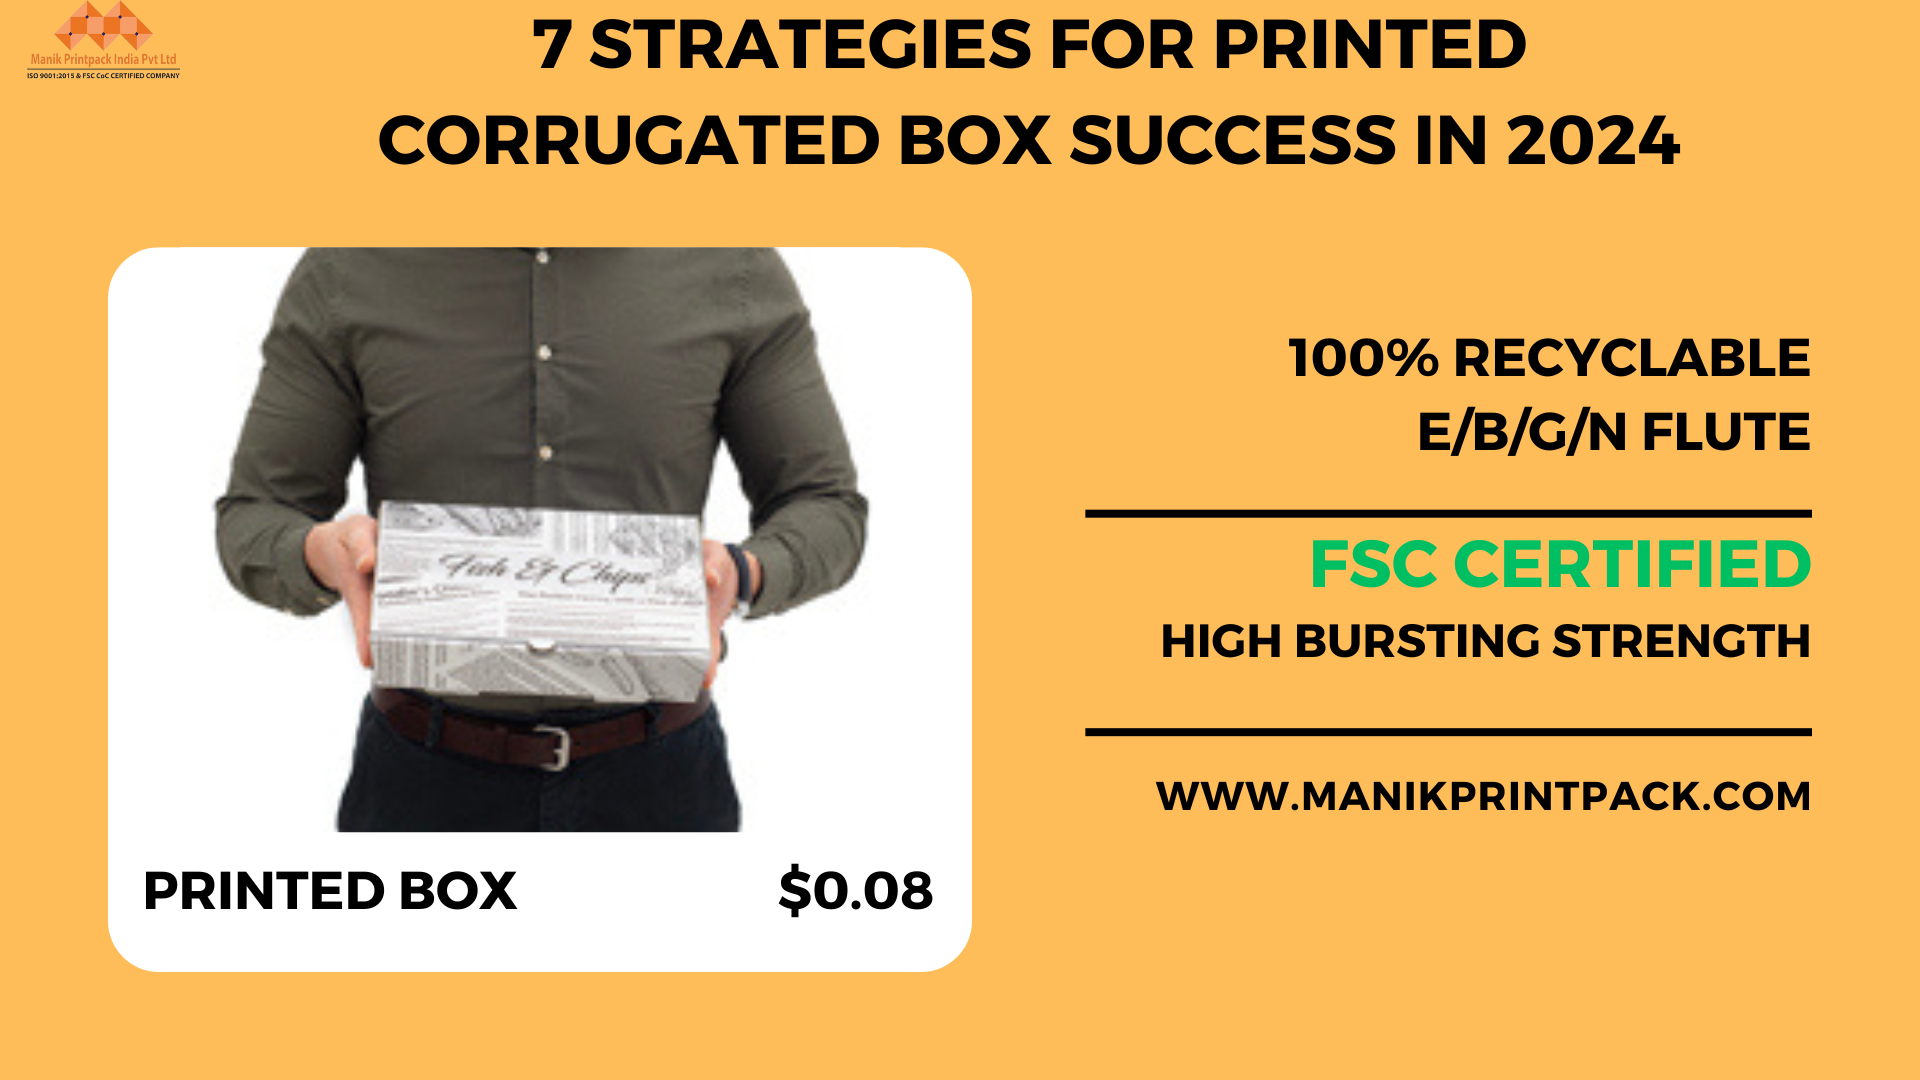 Dominating the Market: Manik Printpack’s 7 Strategies for Printed Corrugated Box Success in 2024